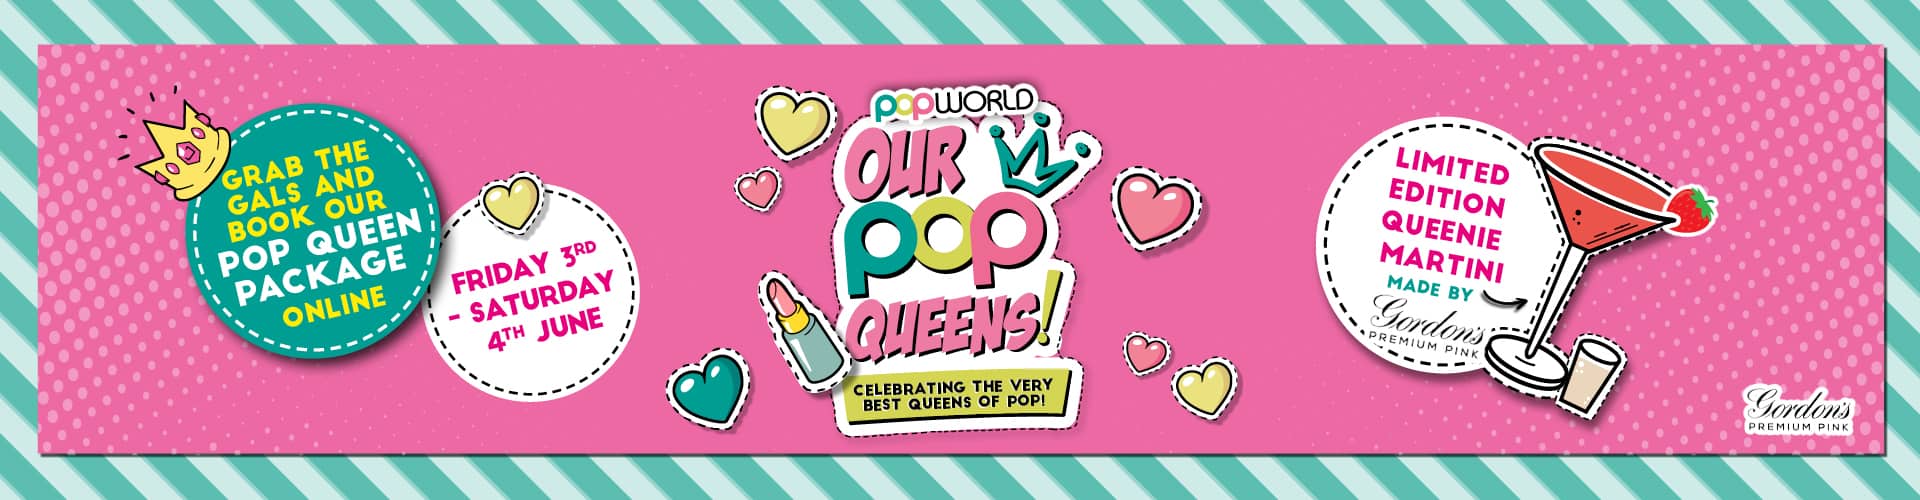 Our Pop Queens for Jubilee Bank Holiday Weekend at Popworld